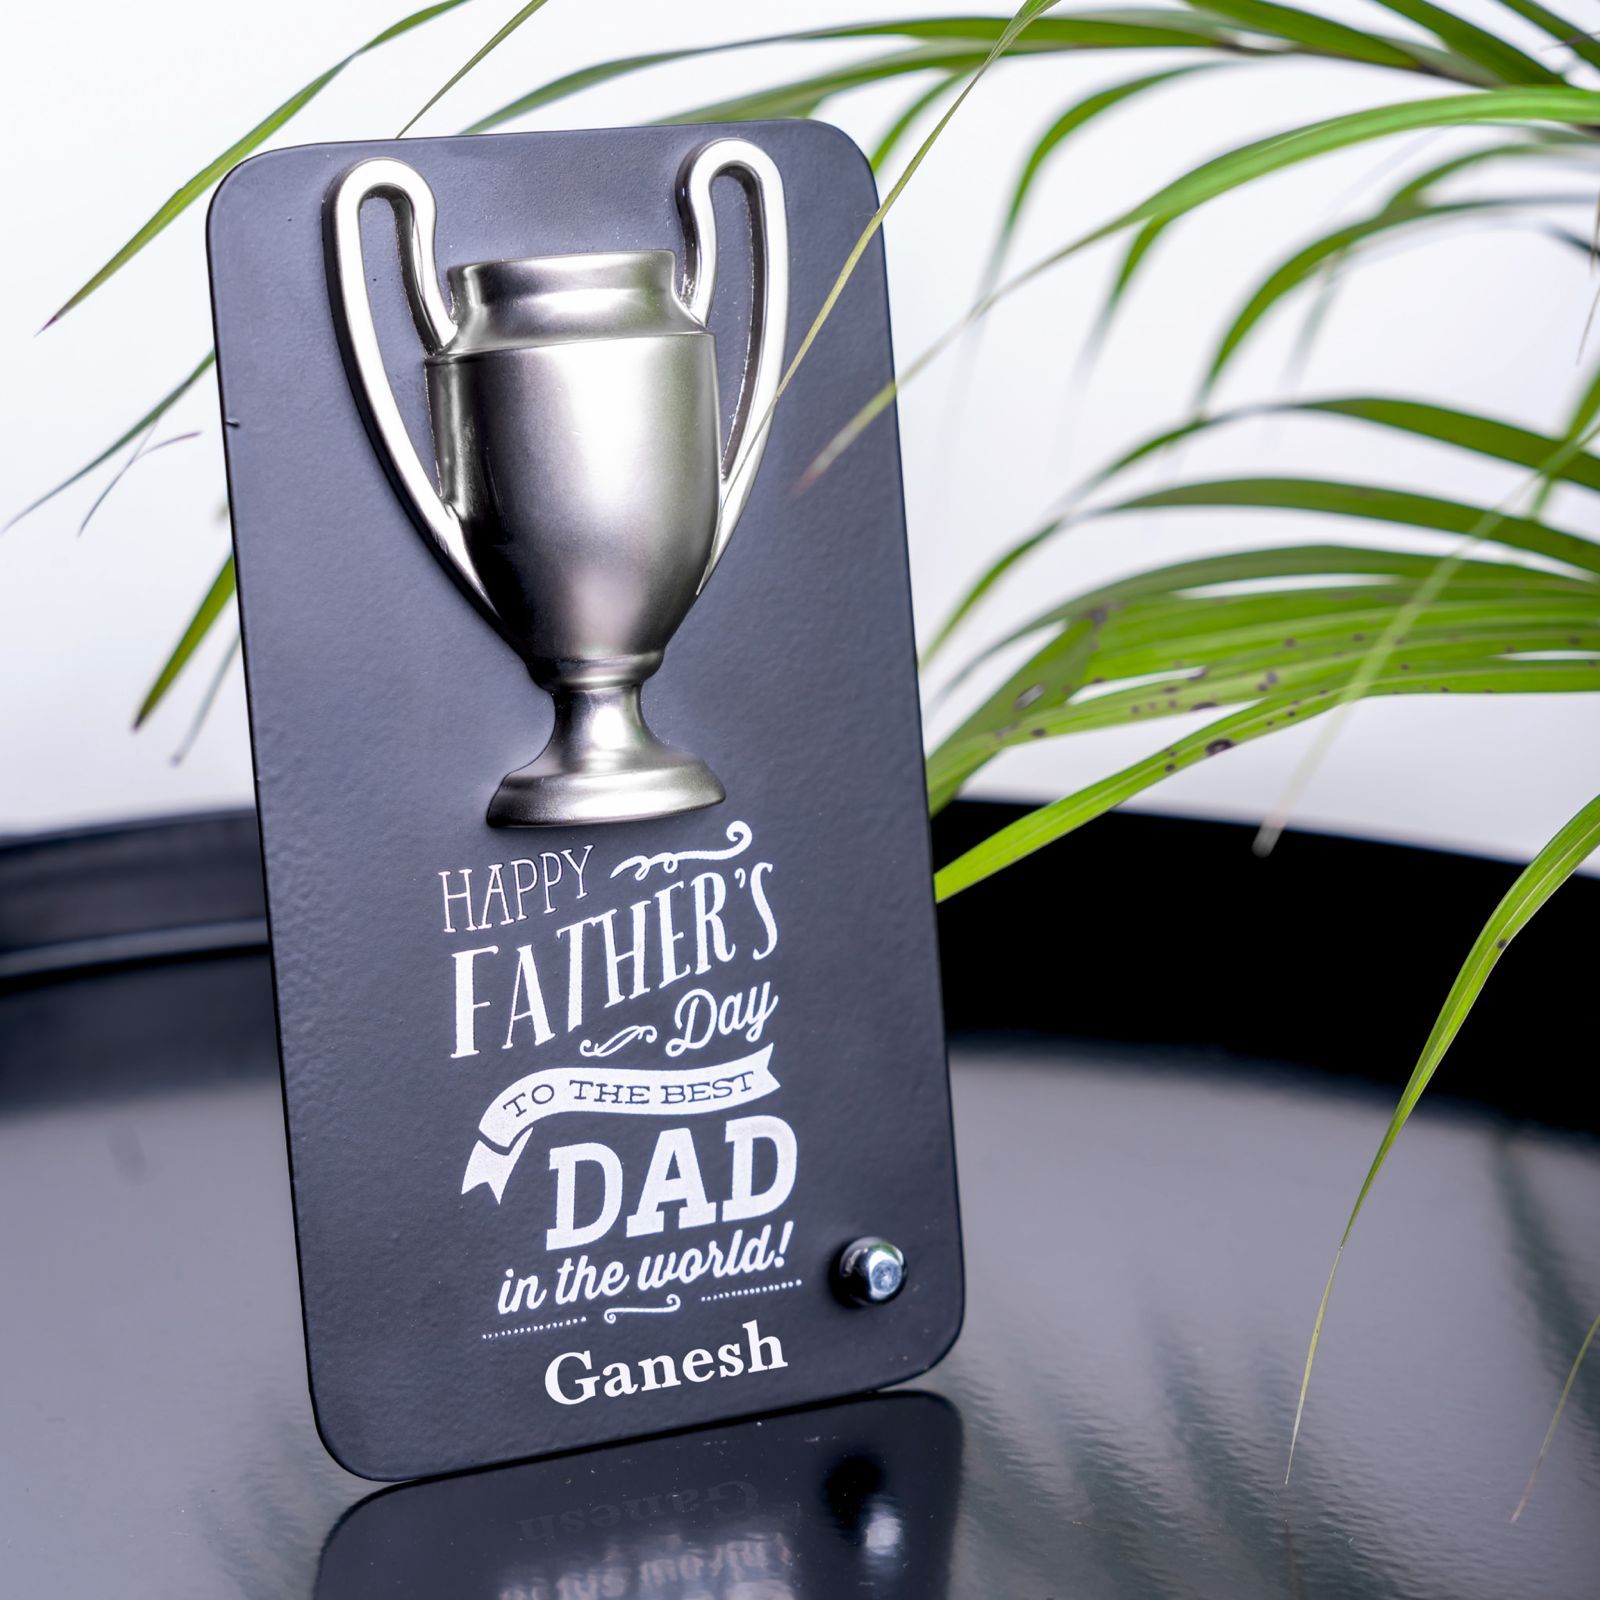 30 Best Homemade Father's Day Gifts 2022 — DIY Father's Day Gifts